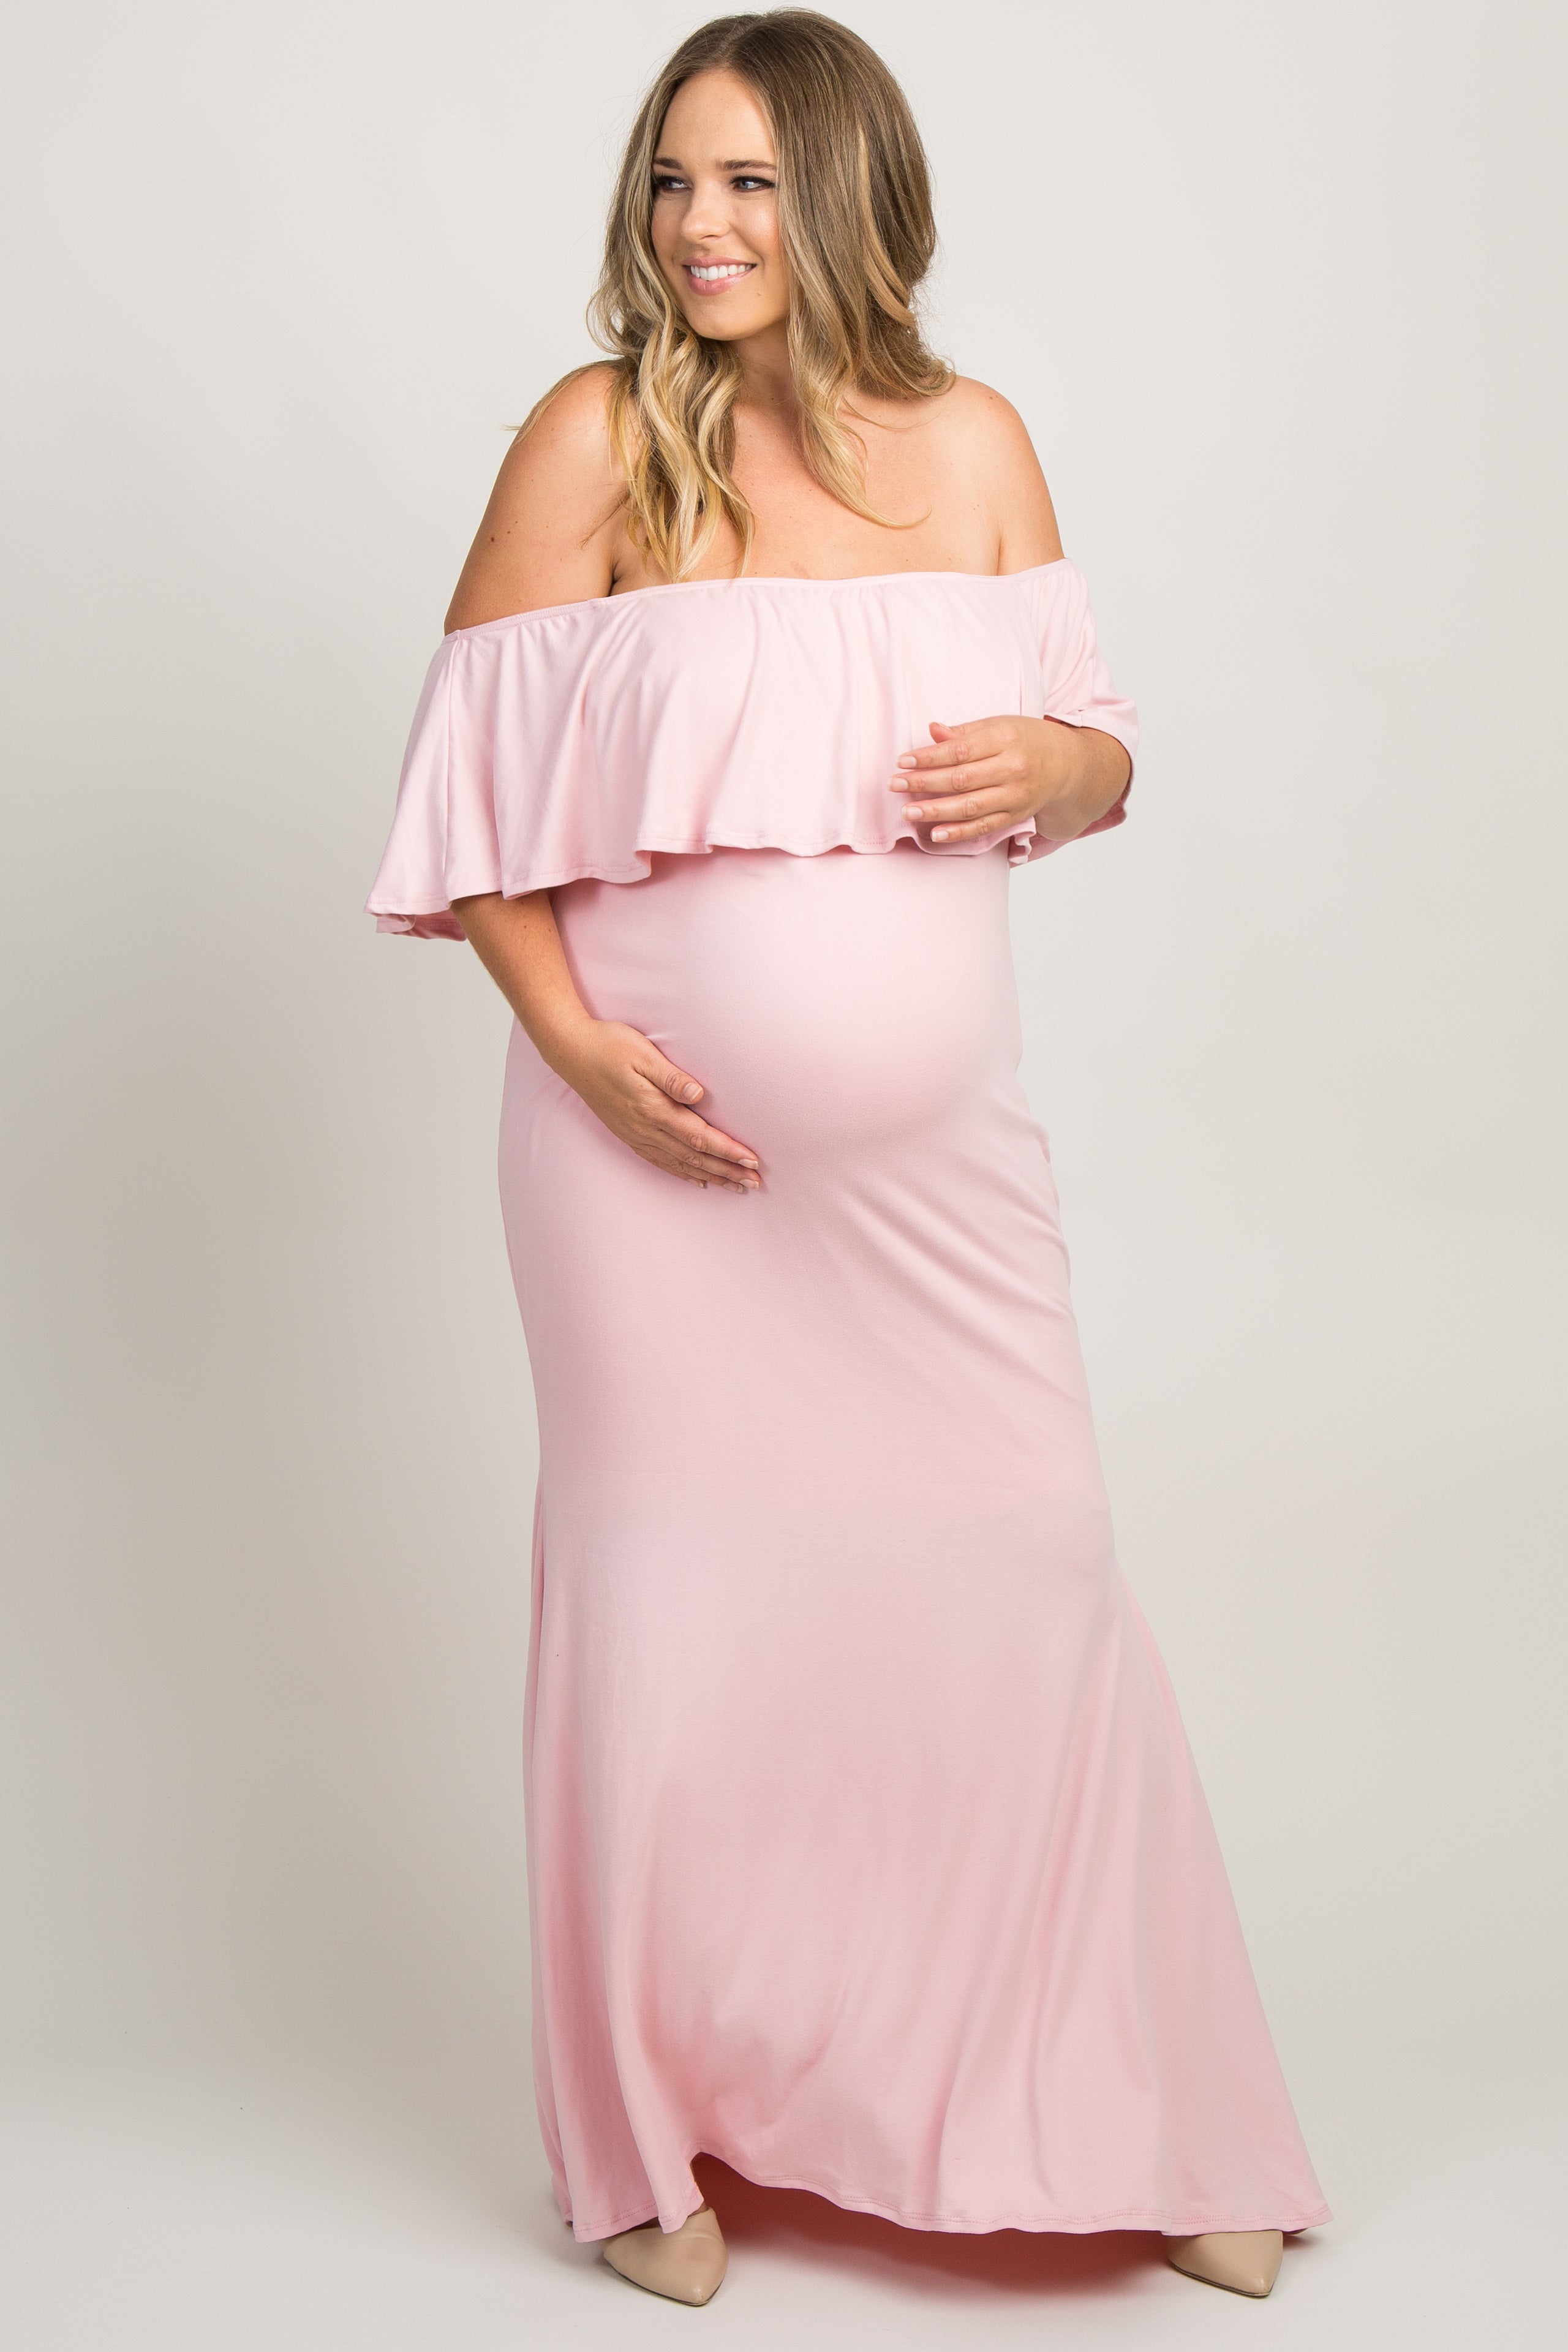 Pink Ruffle Off Shoulder Mermaid Plus Maternity Photoshoot Gown/Dress ...